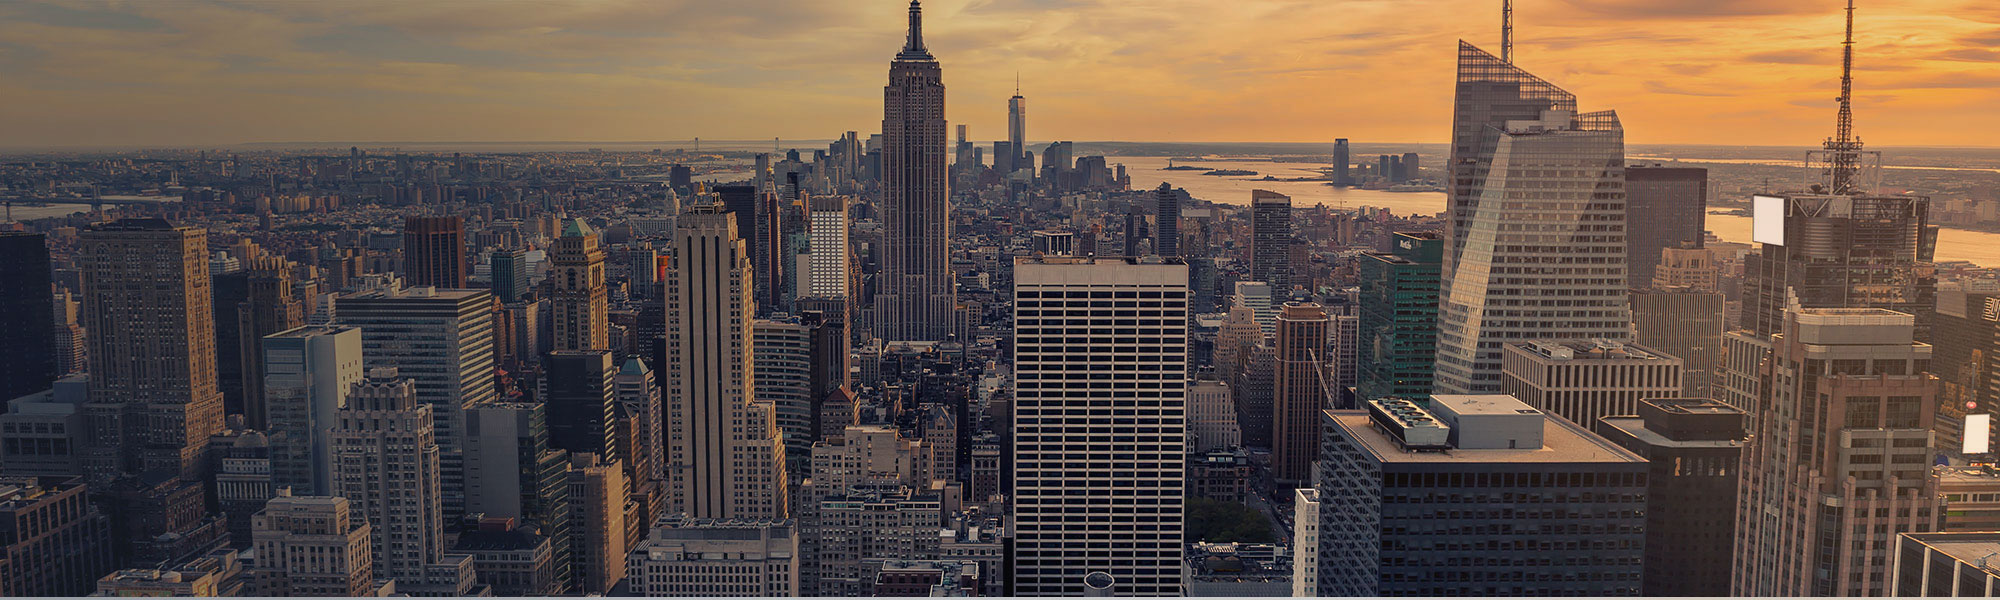 New York Civil Practice Law and Rules (CPLR) Update 2021